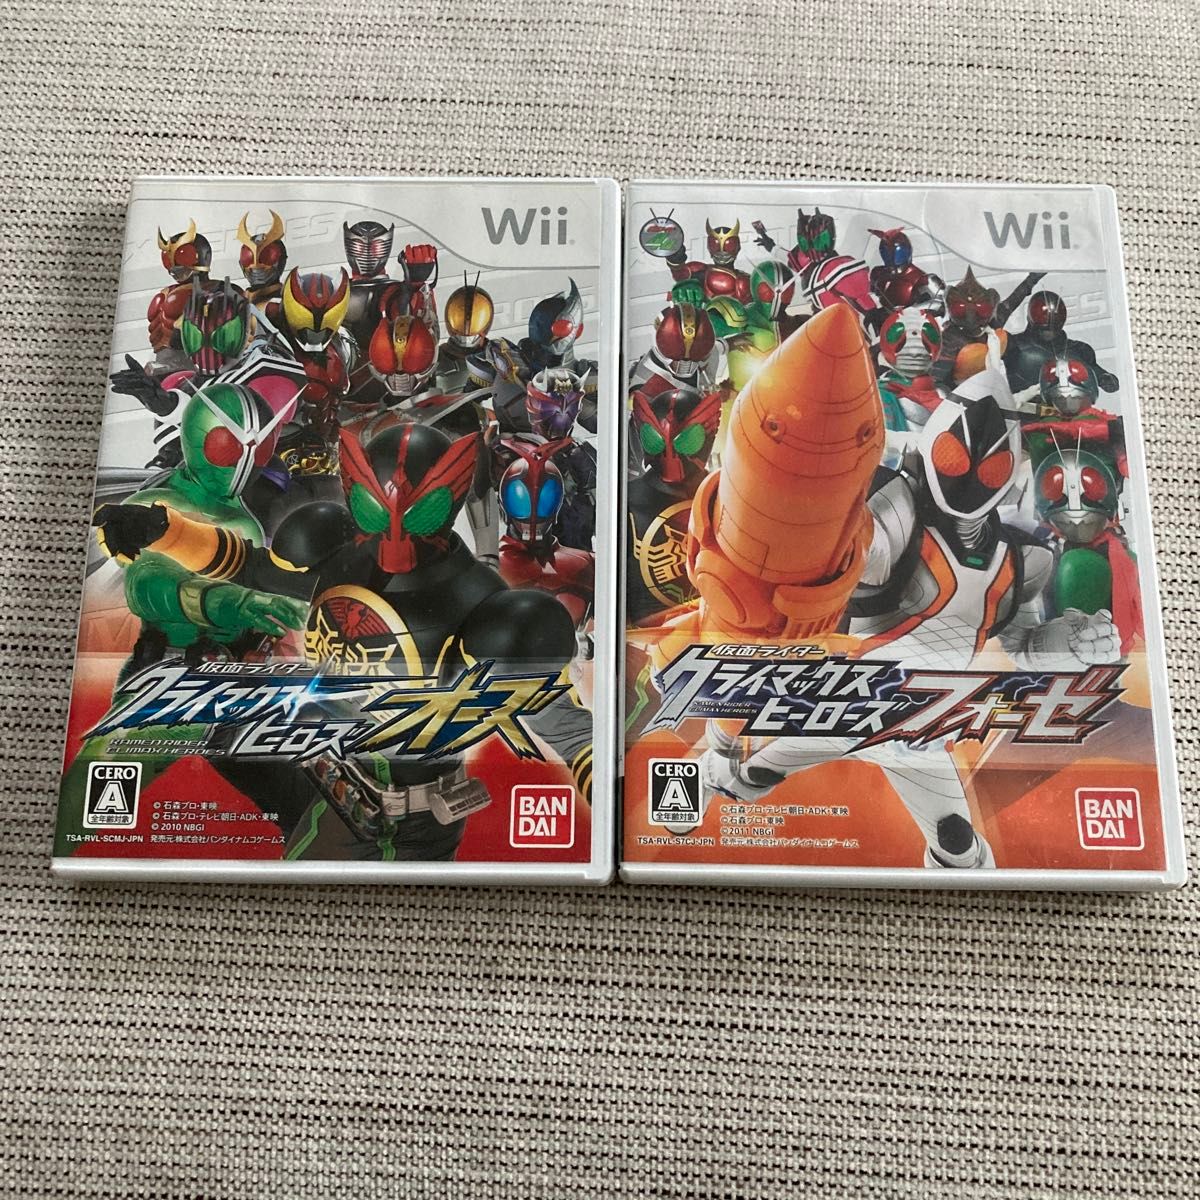 Wiiソフト 仮面ライダー オーズ＆フォーゼ